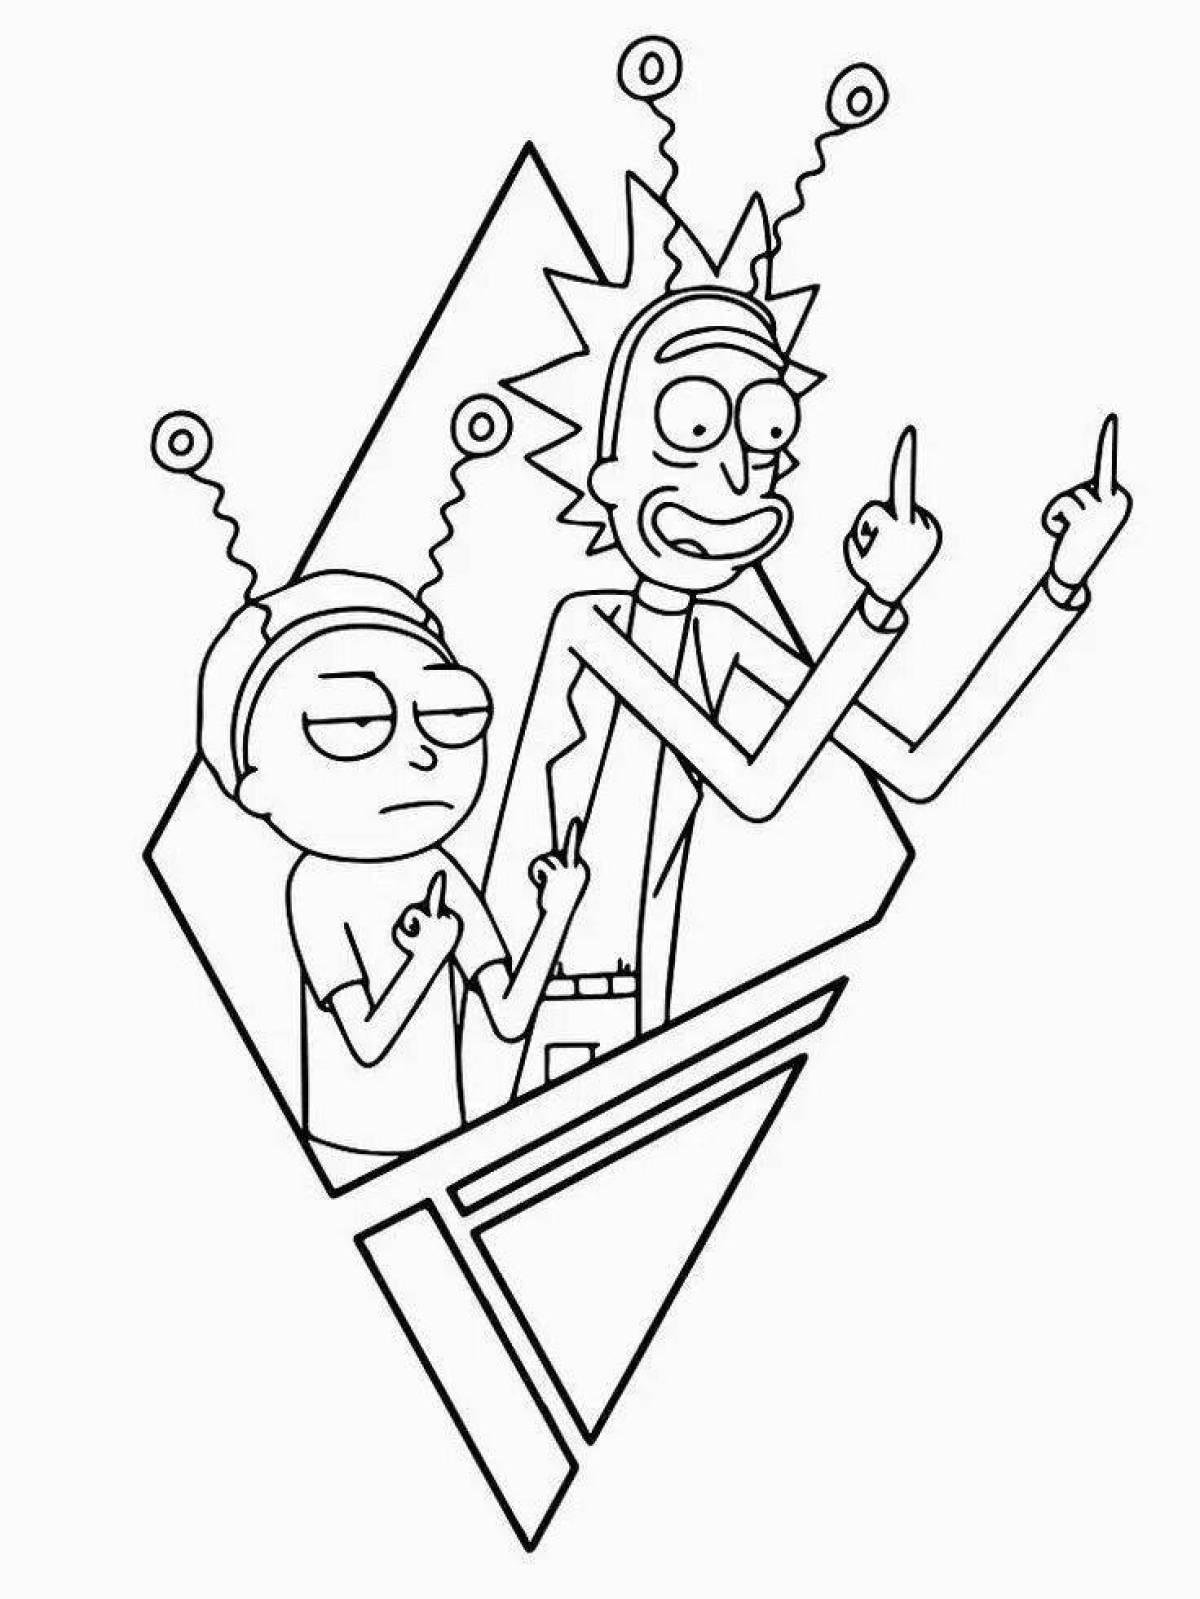 Color-explosion rick coloring page